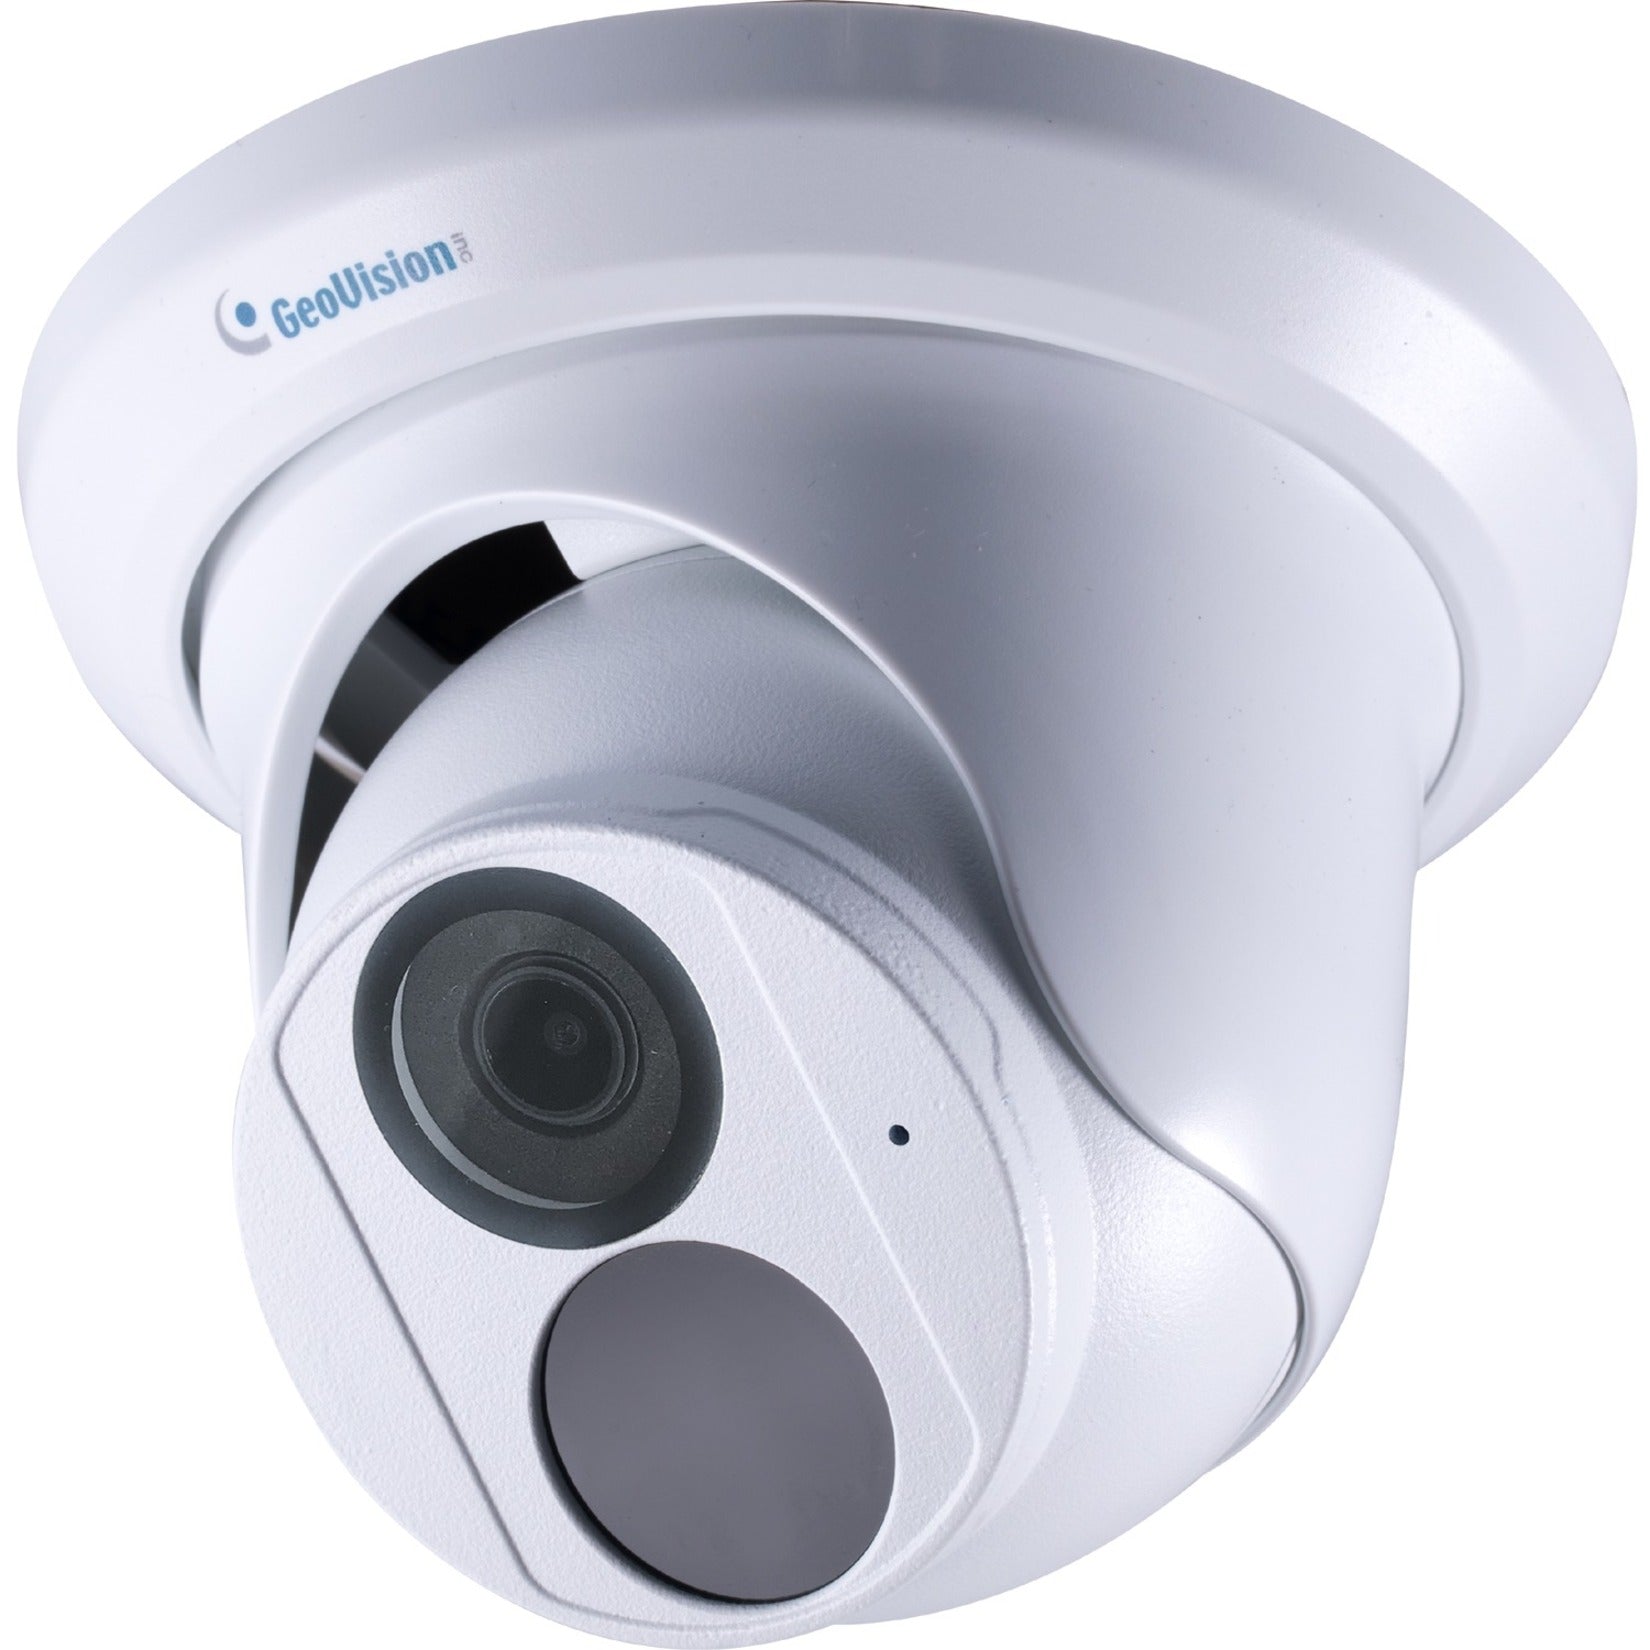 GeoVision 125-EBD8800-000 AI 8MP H.265 Super Low Lux WDR Pro IR Eyeball IP Dome, Outdoor Security Camera